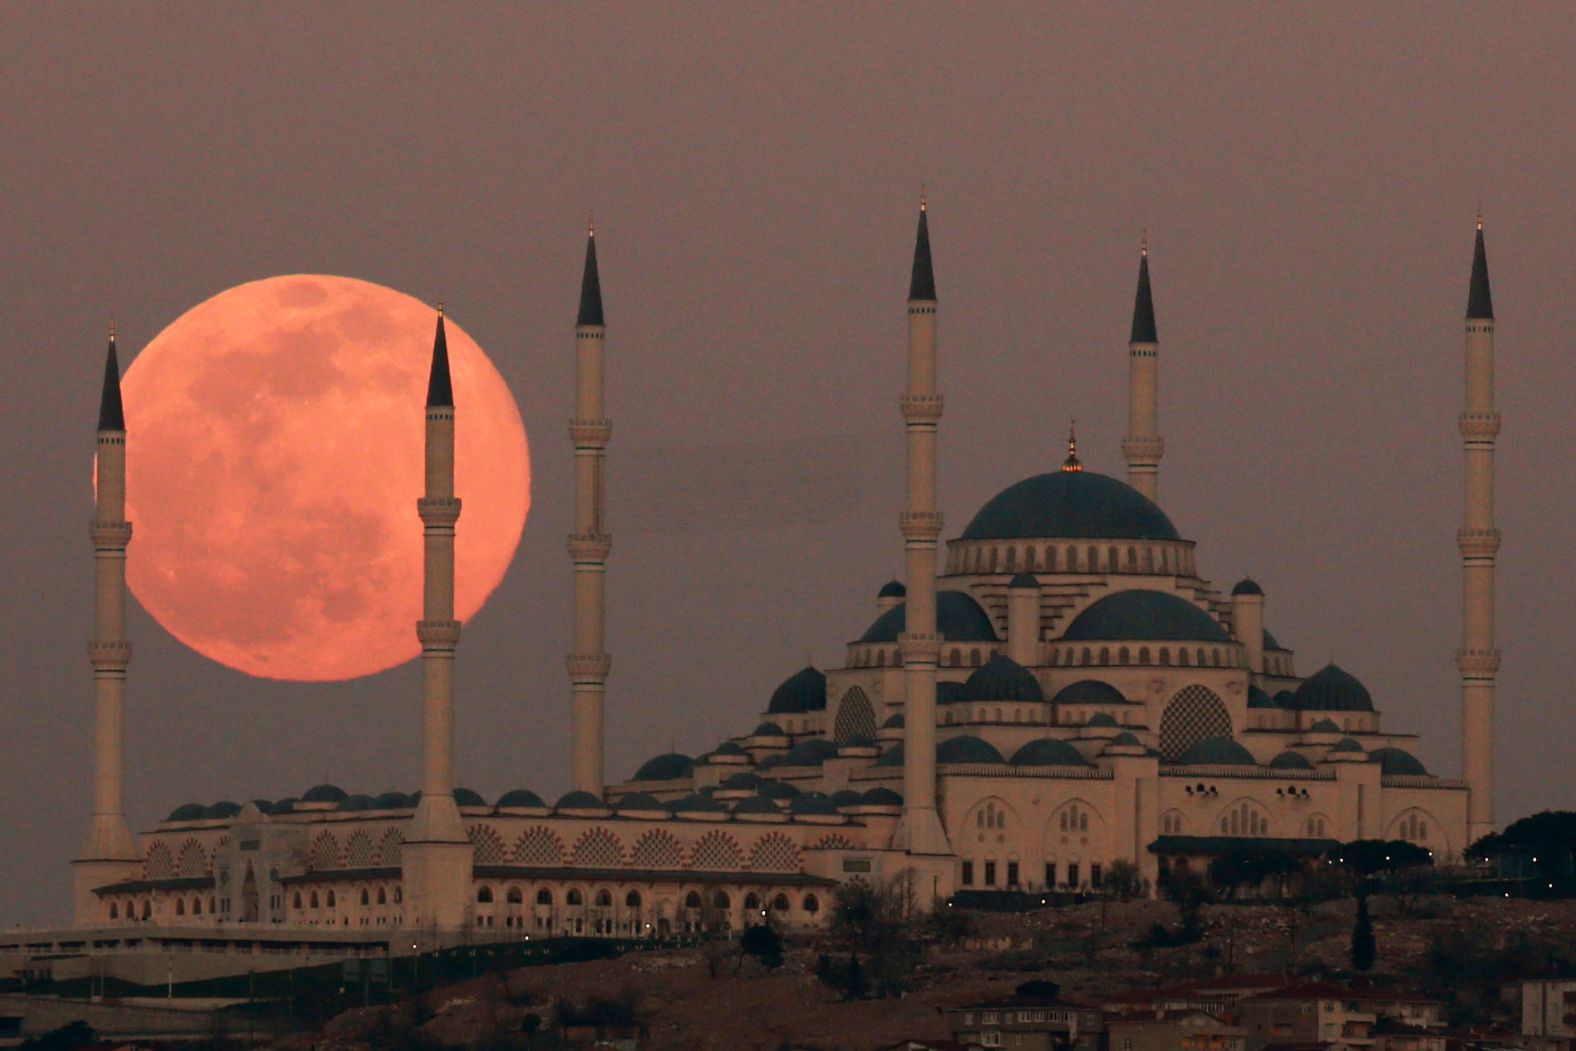 The moon is seen behind the Camlica Mosque in Istanbul, Turkey.